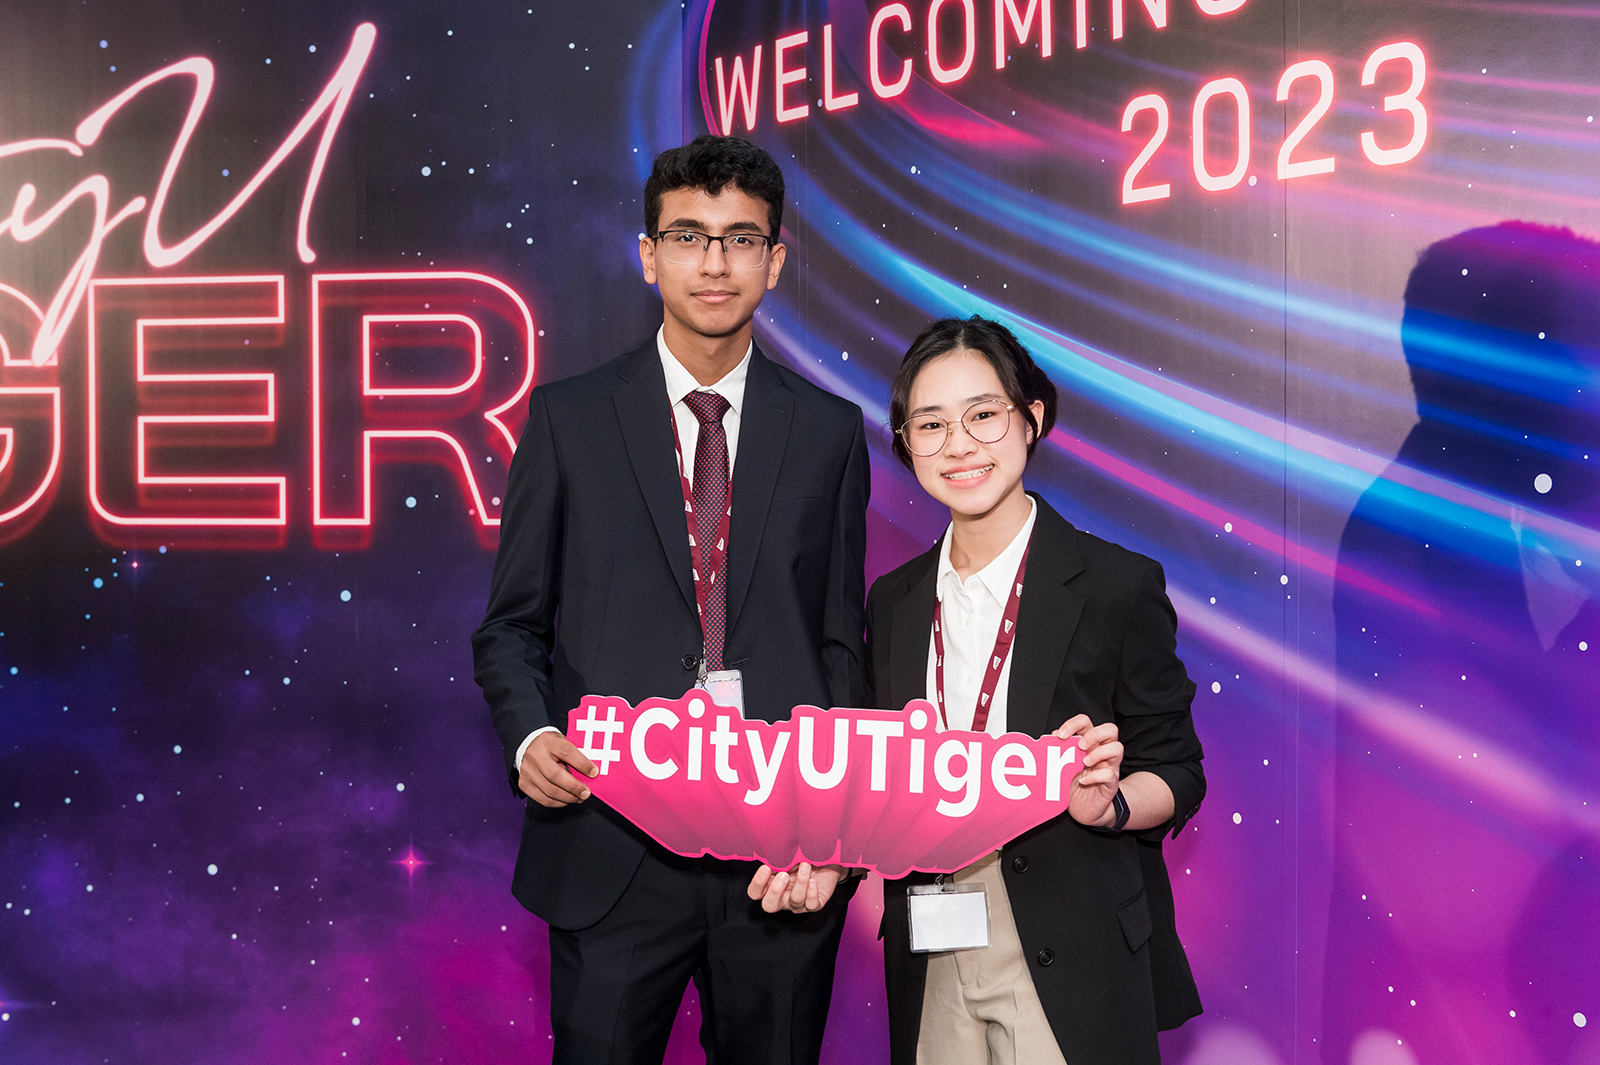 Syed Ayan Ali (left) and Seline Hung learned a lot in the CityU Tiger programme.